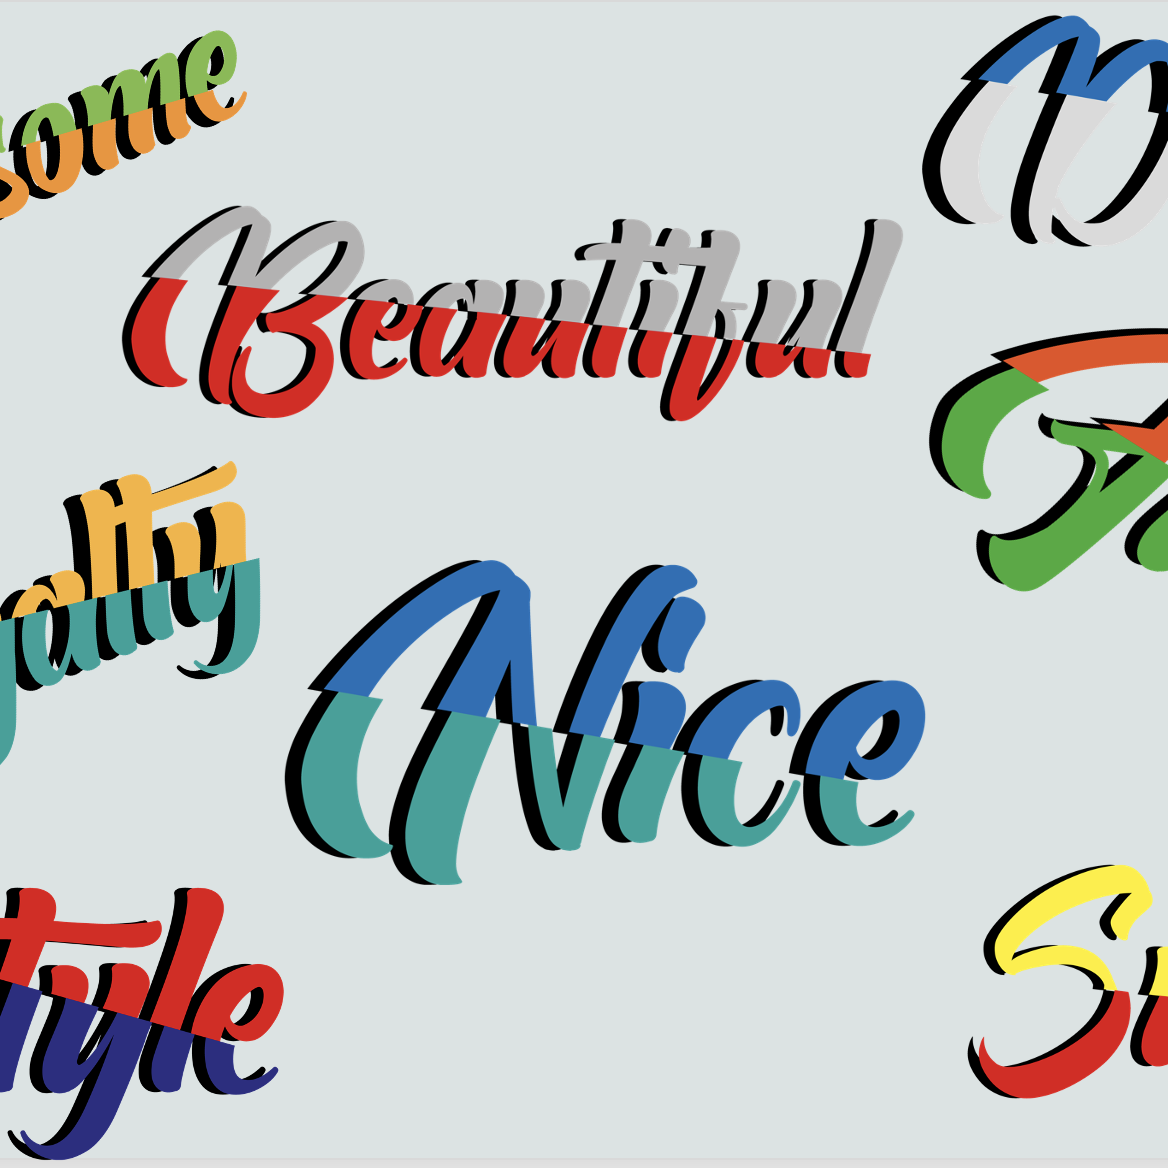 8 Cool Letterings In A Nice Style With Nice Colors High-Res Textures - Only $10